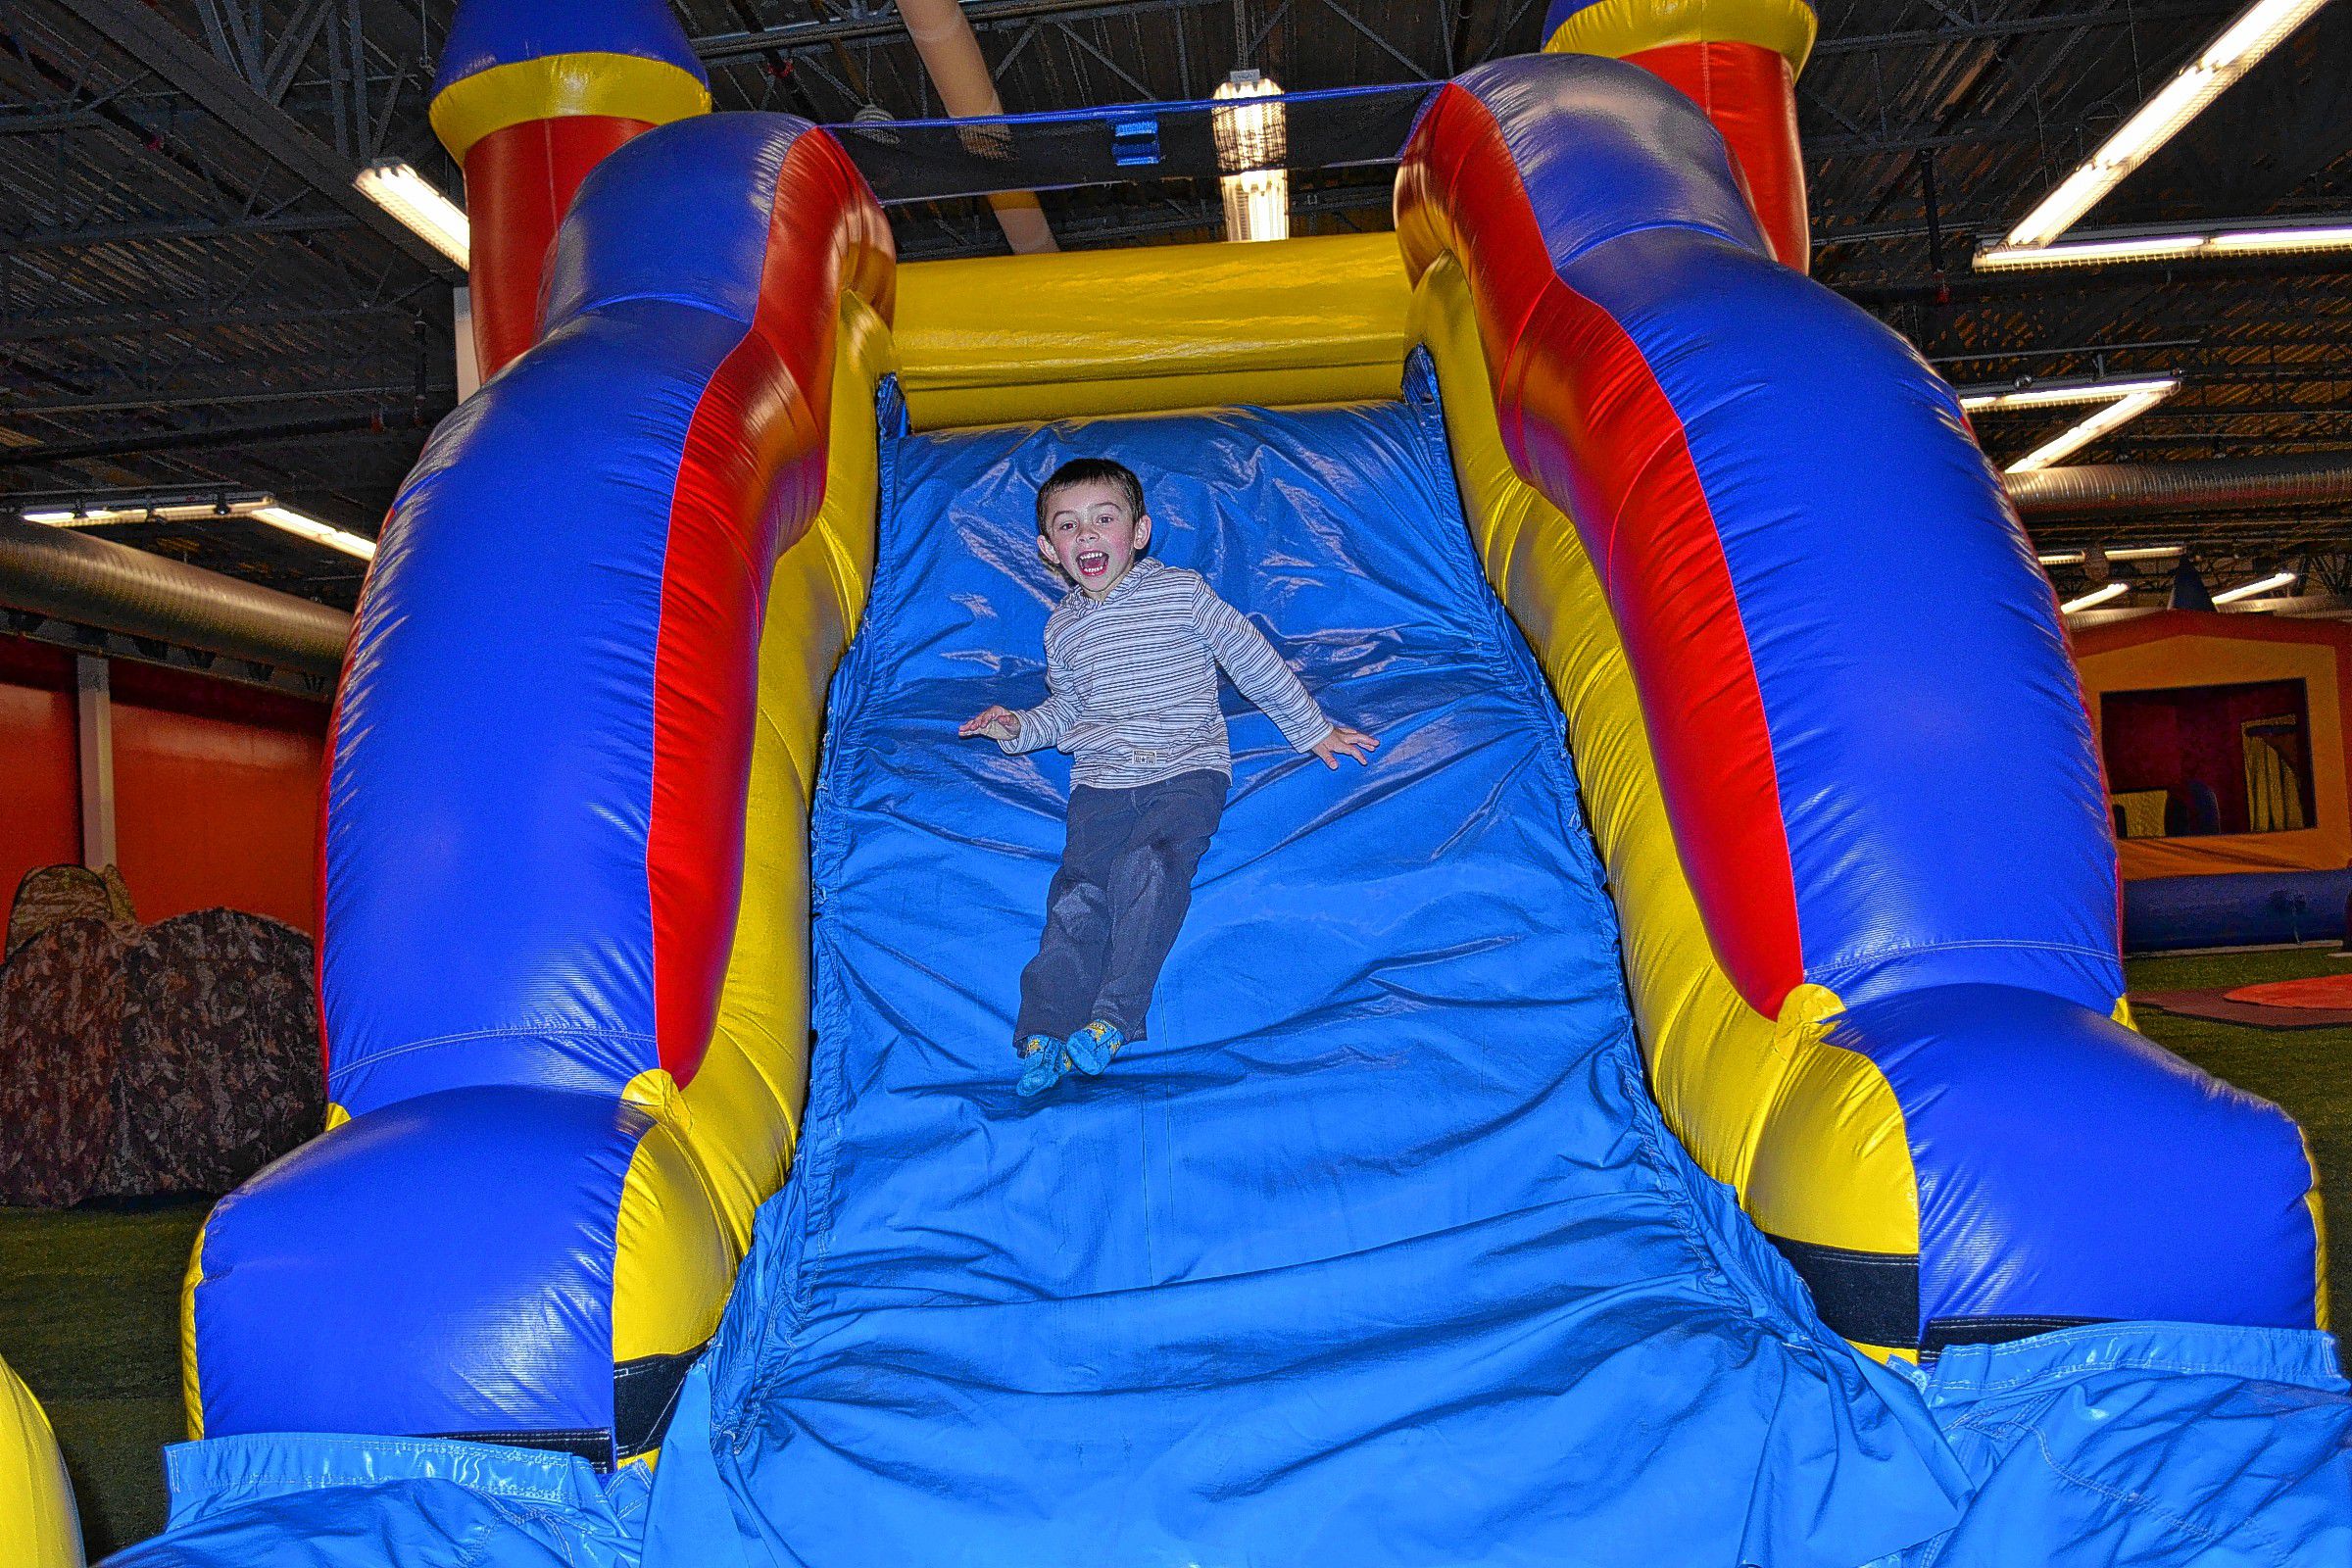 Chris Smykil belly-flops onto Jon White in the Sumo wrestling ring inside Bounce House Entertainment Center. Good thing they were wearing those suits! Below: Braden Bosco, 5, has a whale of a time. 